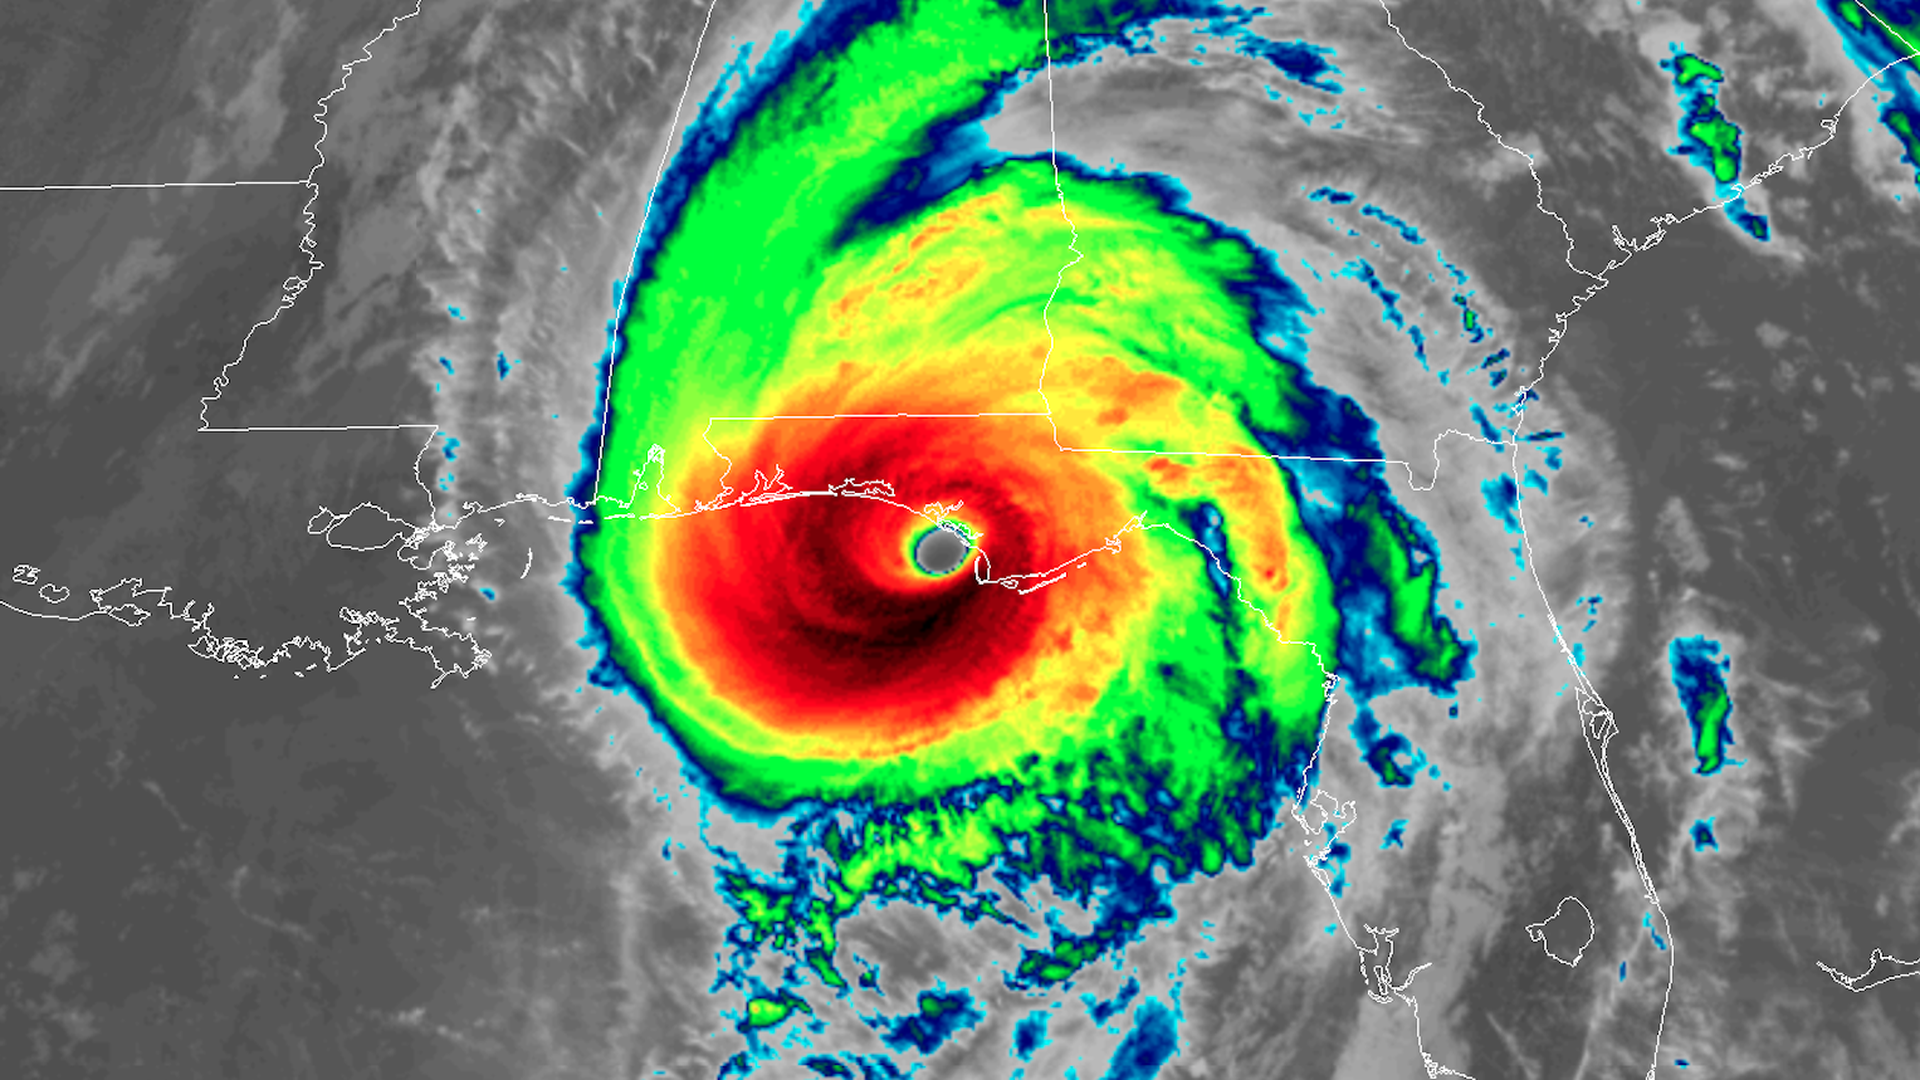 Hurricane Michael making landfall in the Florida Panhandle as one of the most intense hurricanes on record. 